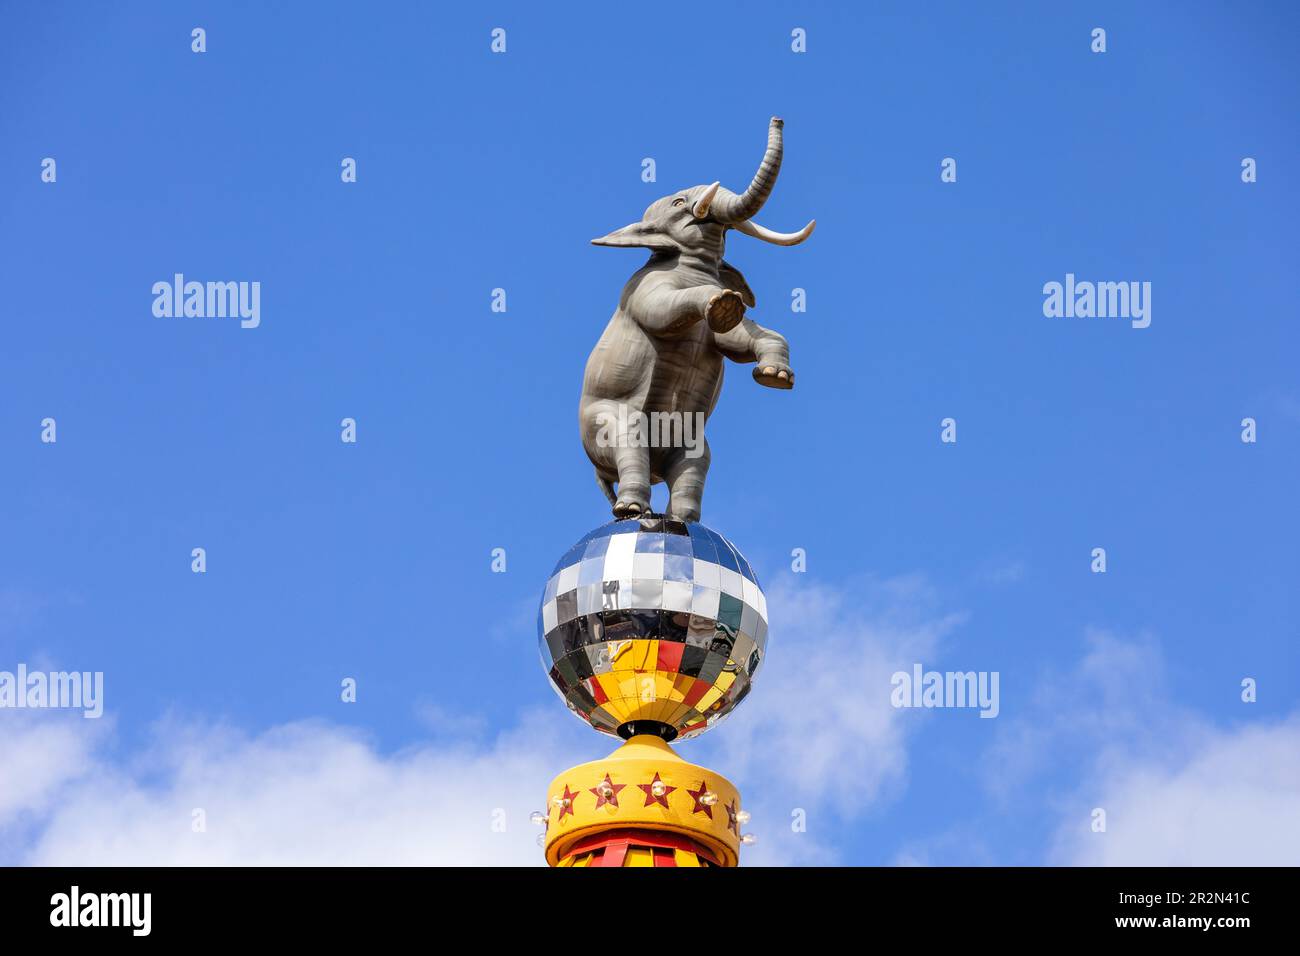 Circus Elephant Sculpture Standing Up On Top Of The Big Top Mirror Maze Attraction In Clifton Hill, Niagara Falls Ontario Canada Stock Photo